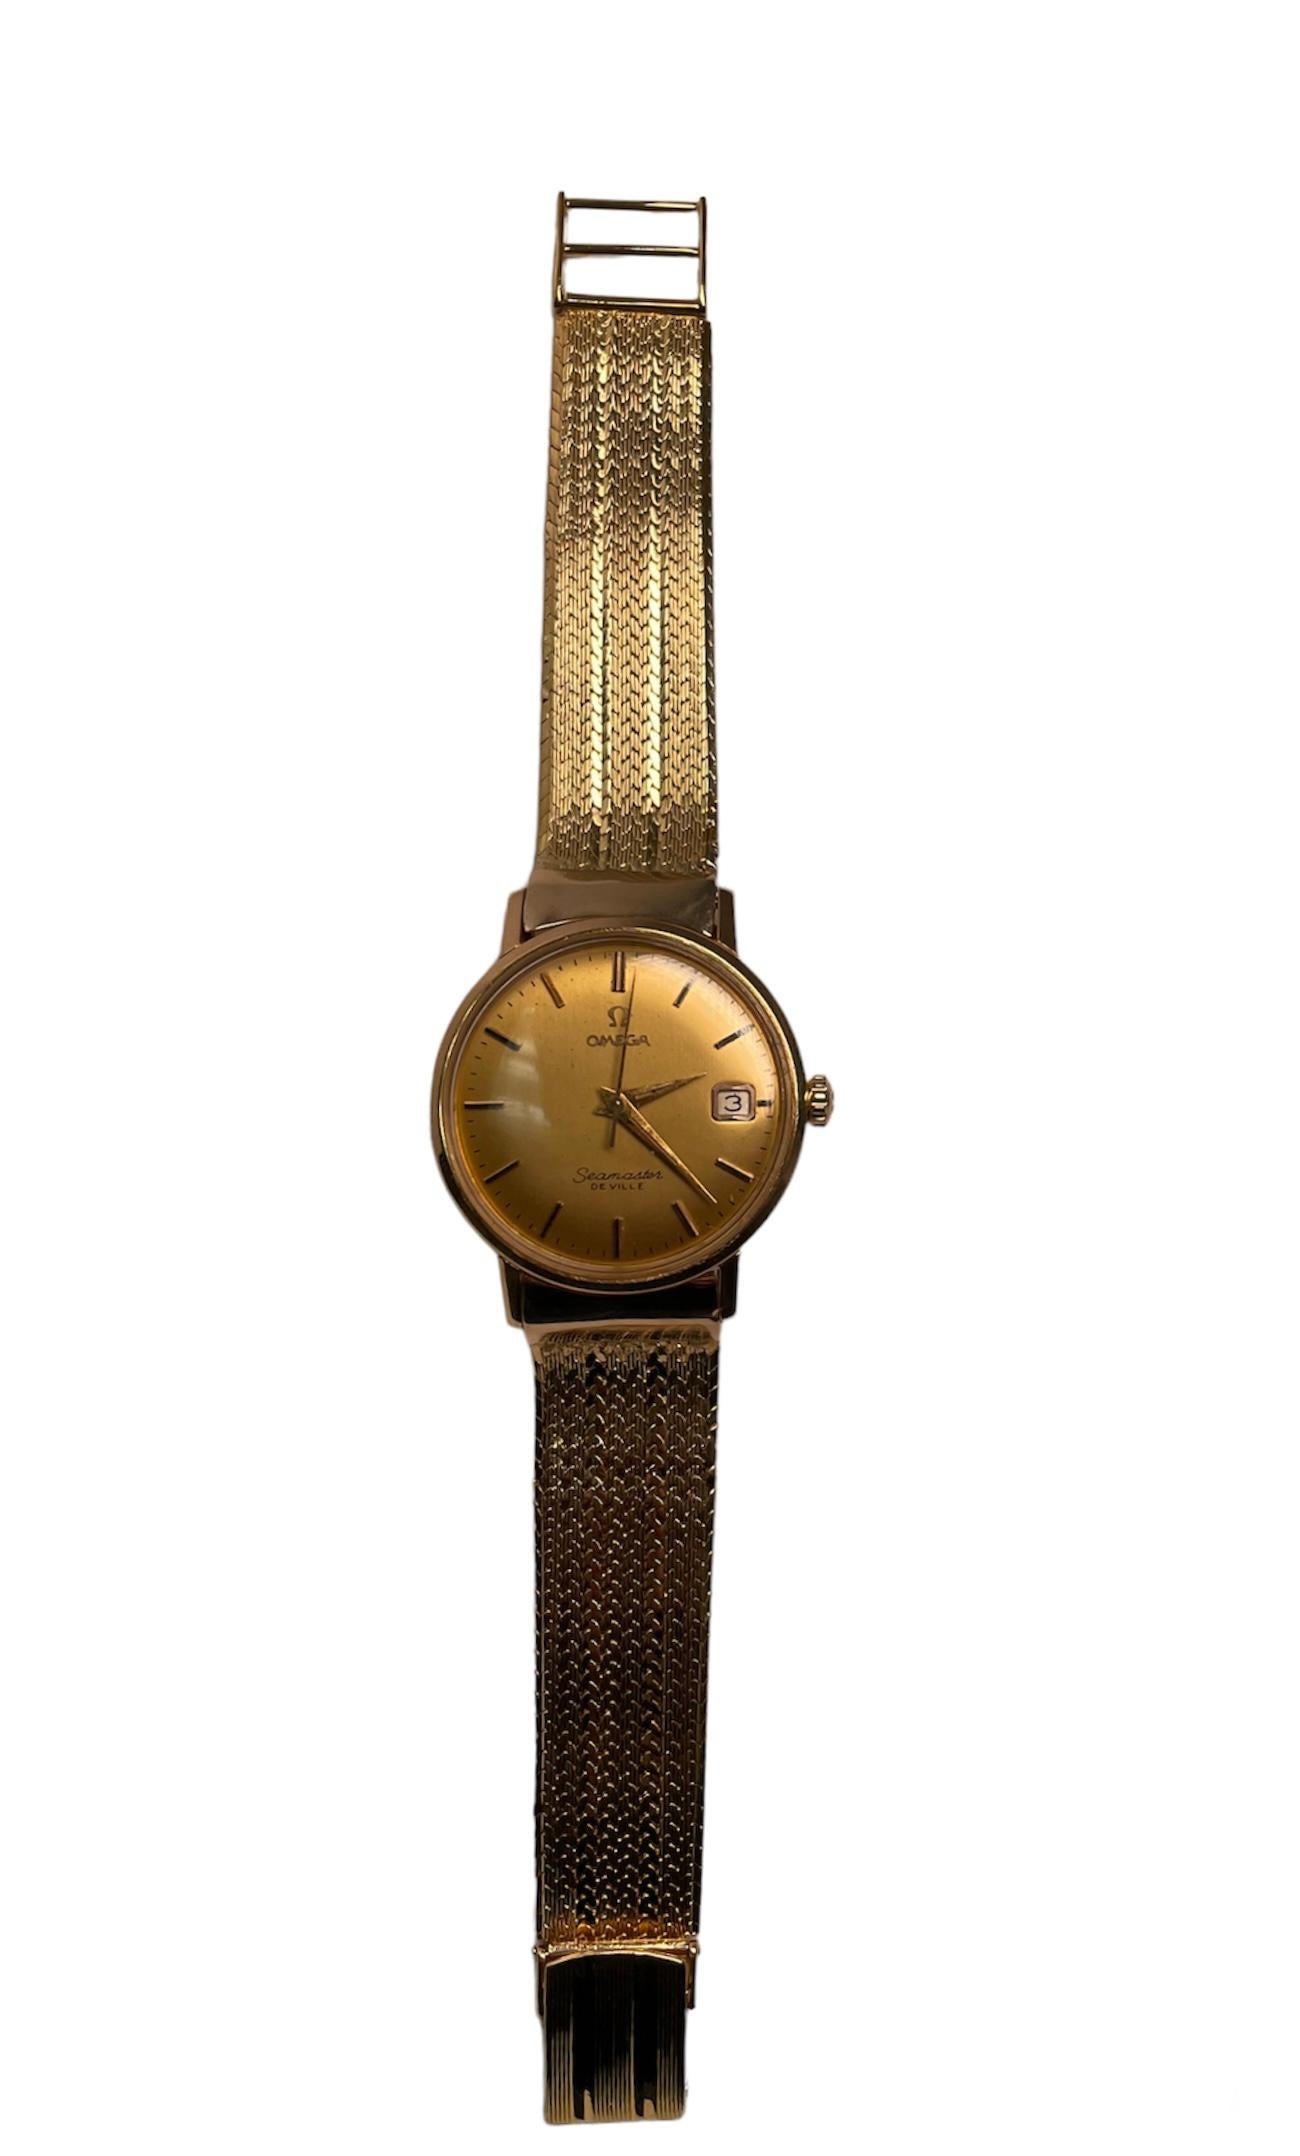 This is an 18k yellow gold Omega Men Watch. It is a Seamaster De Ville model. It is known as an elegant dress watch. It has a manual winding movement. The dial is champagne color and is hallmarked Omega with its logo at the top and Seamaster De